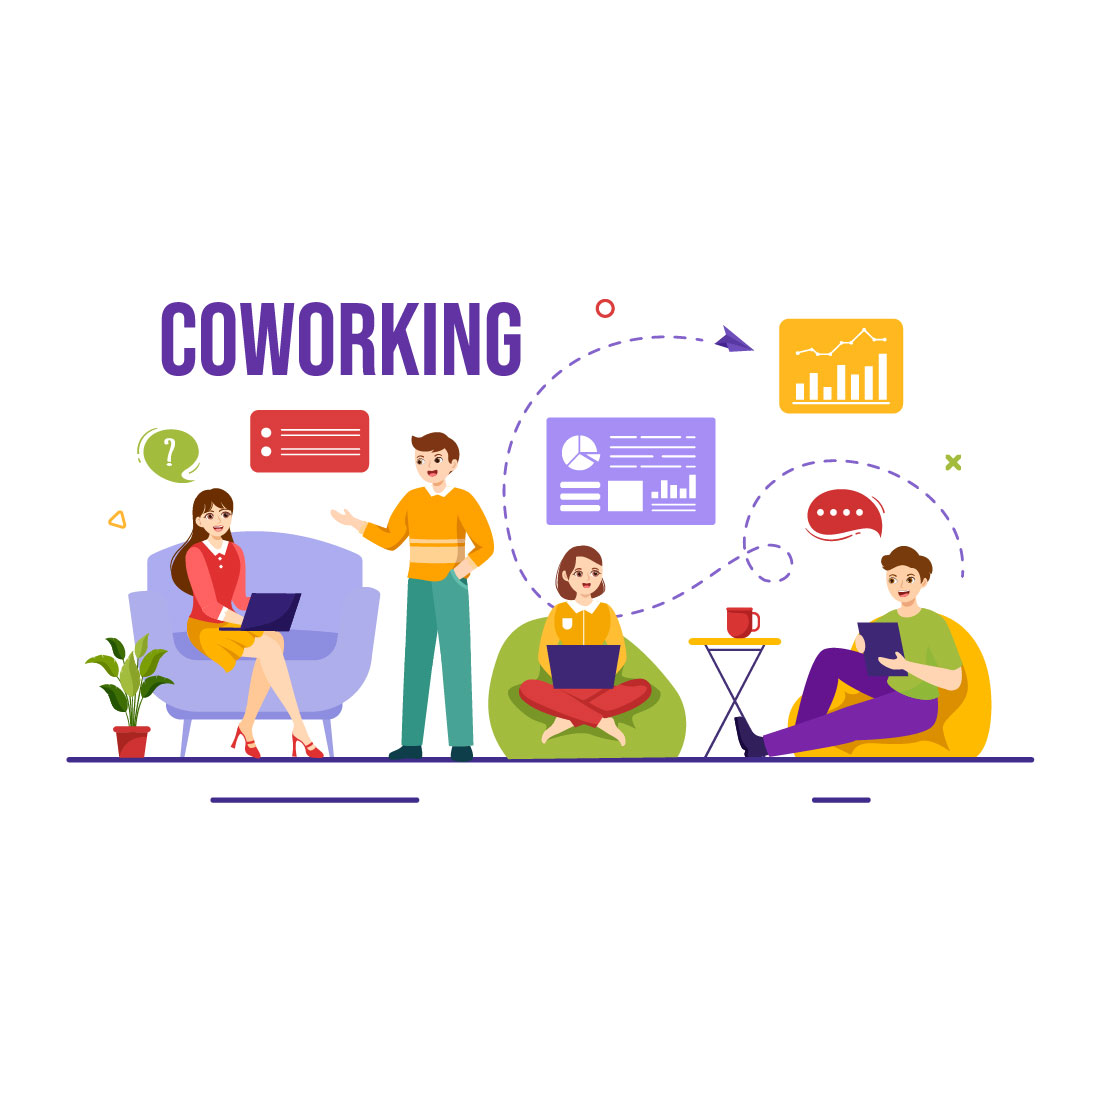 15 Coworking Business Illustration cover image.